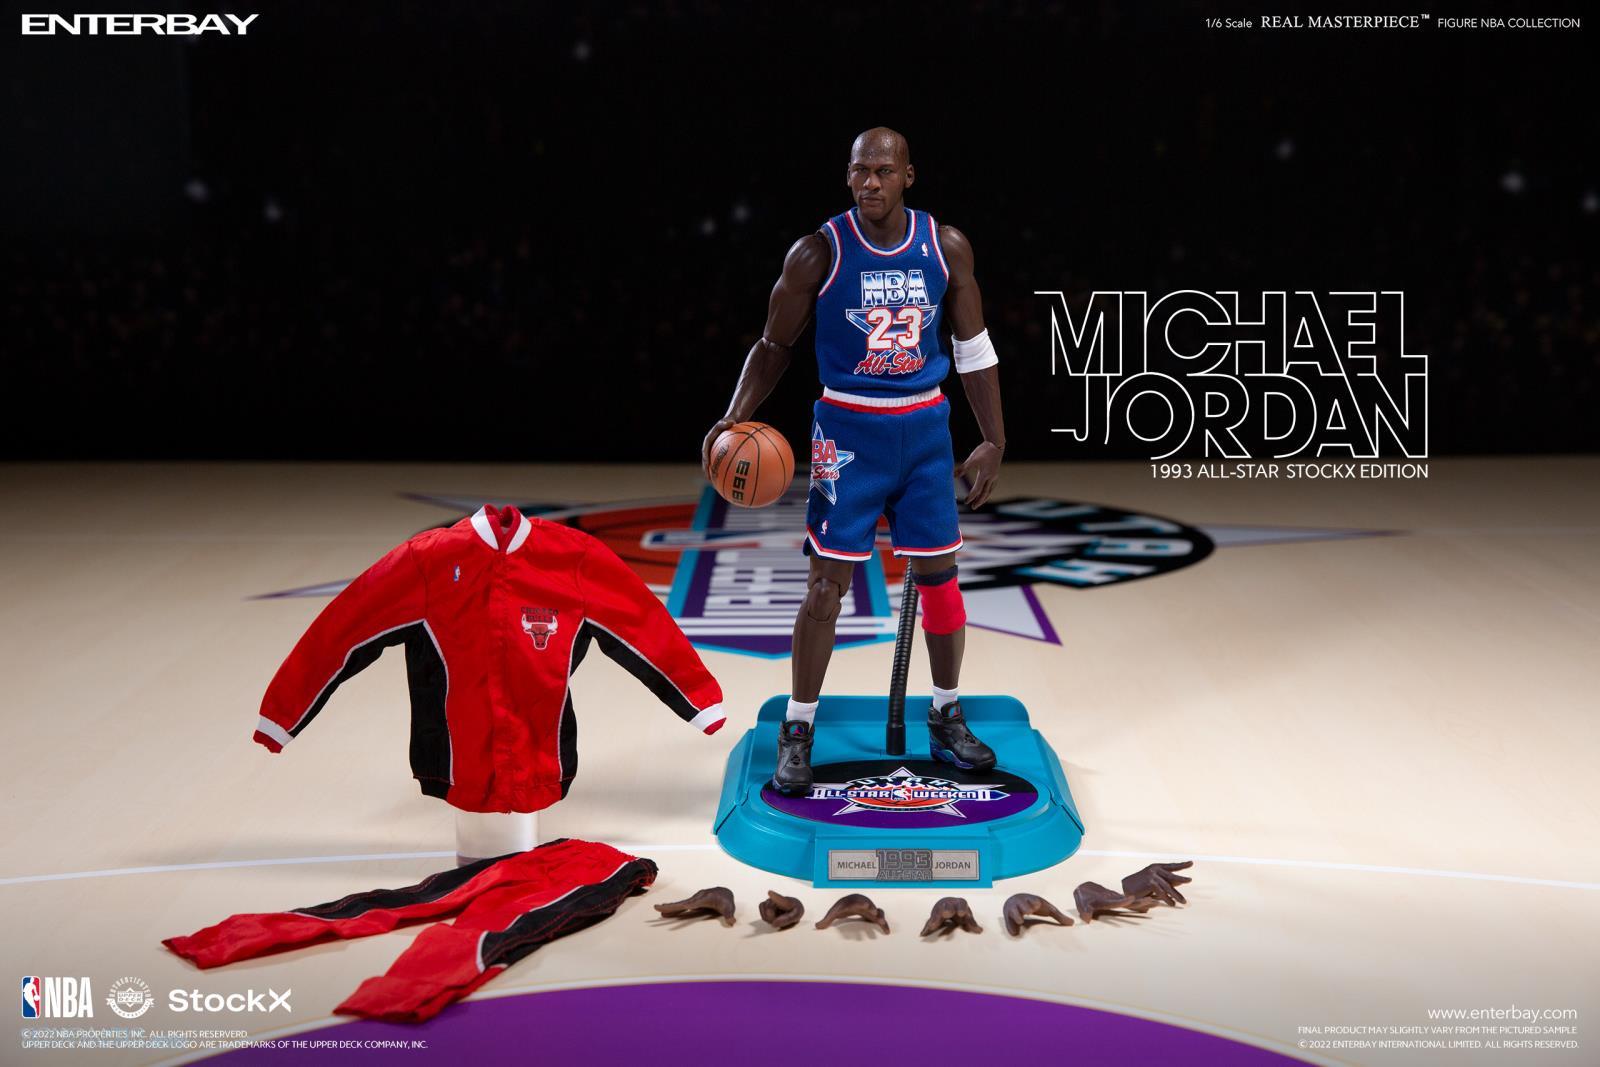 NEW PRODUCT: Enterbay - Real Masterpiece NBA Collection Michael Jordan All Star 1993 Edition 0973